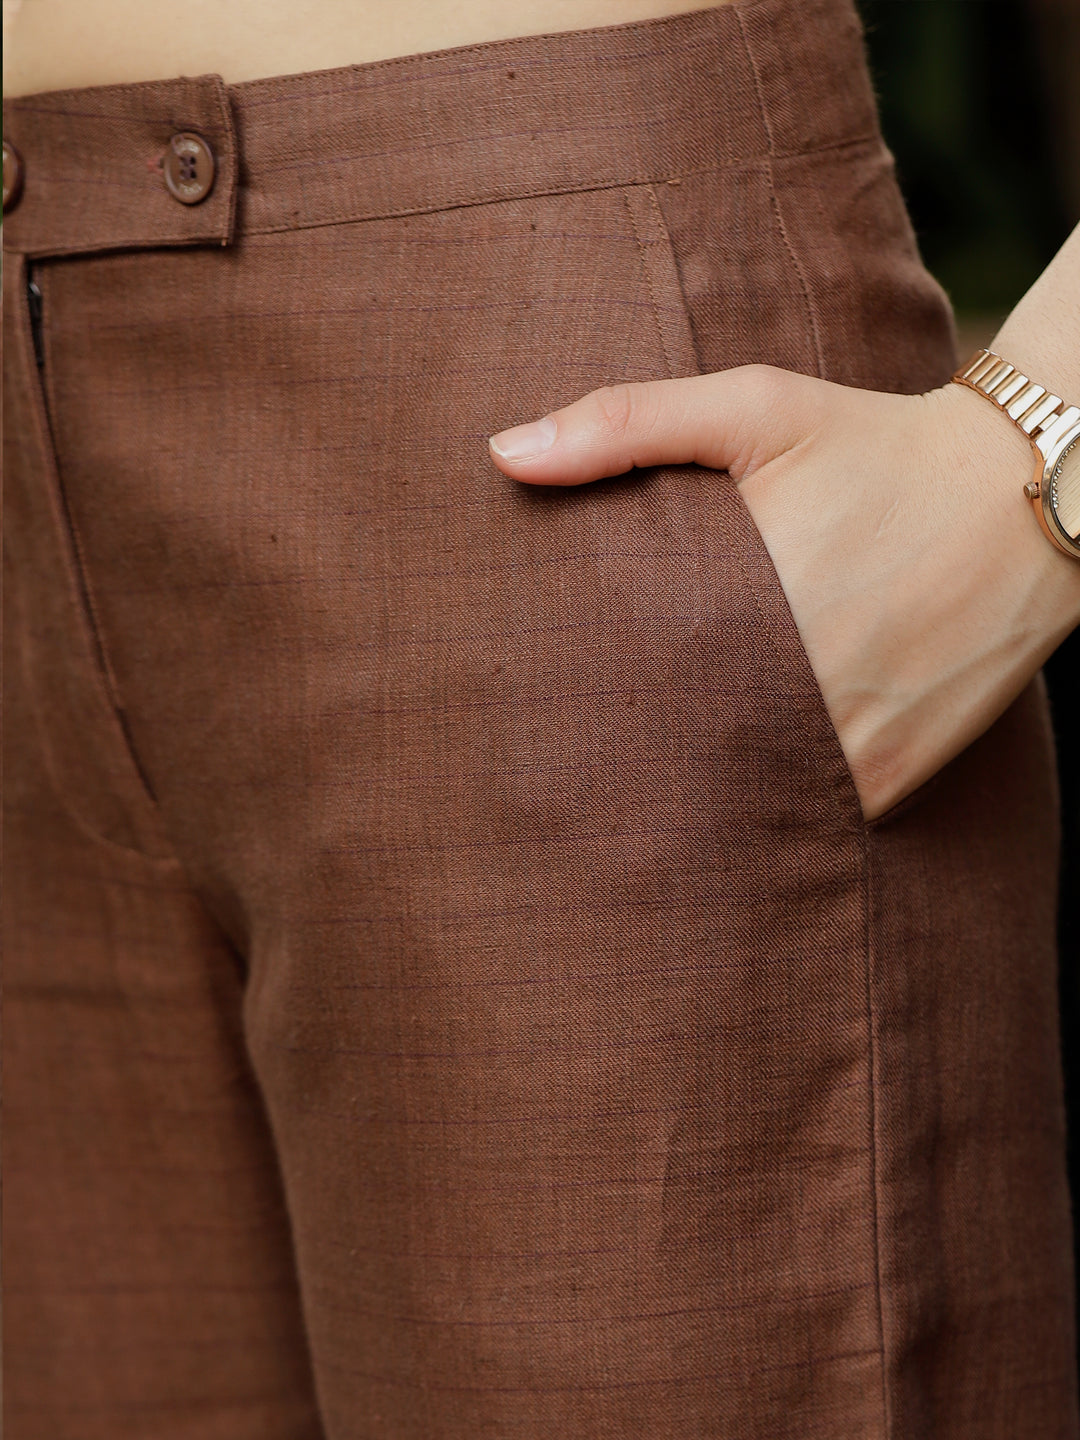 Luna - Ankle Length Pure Linen Trousers - Chocolate Brown